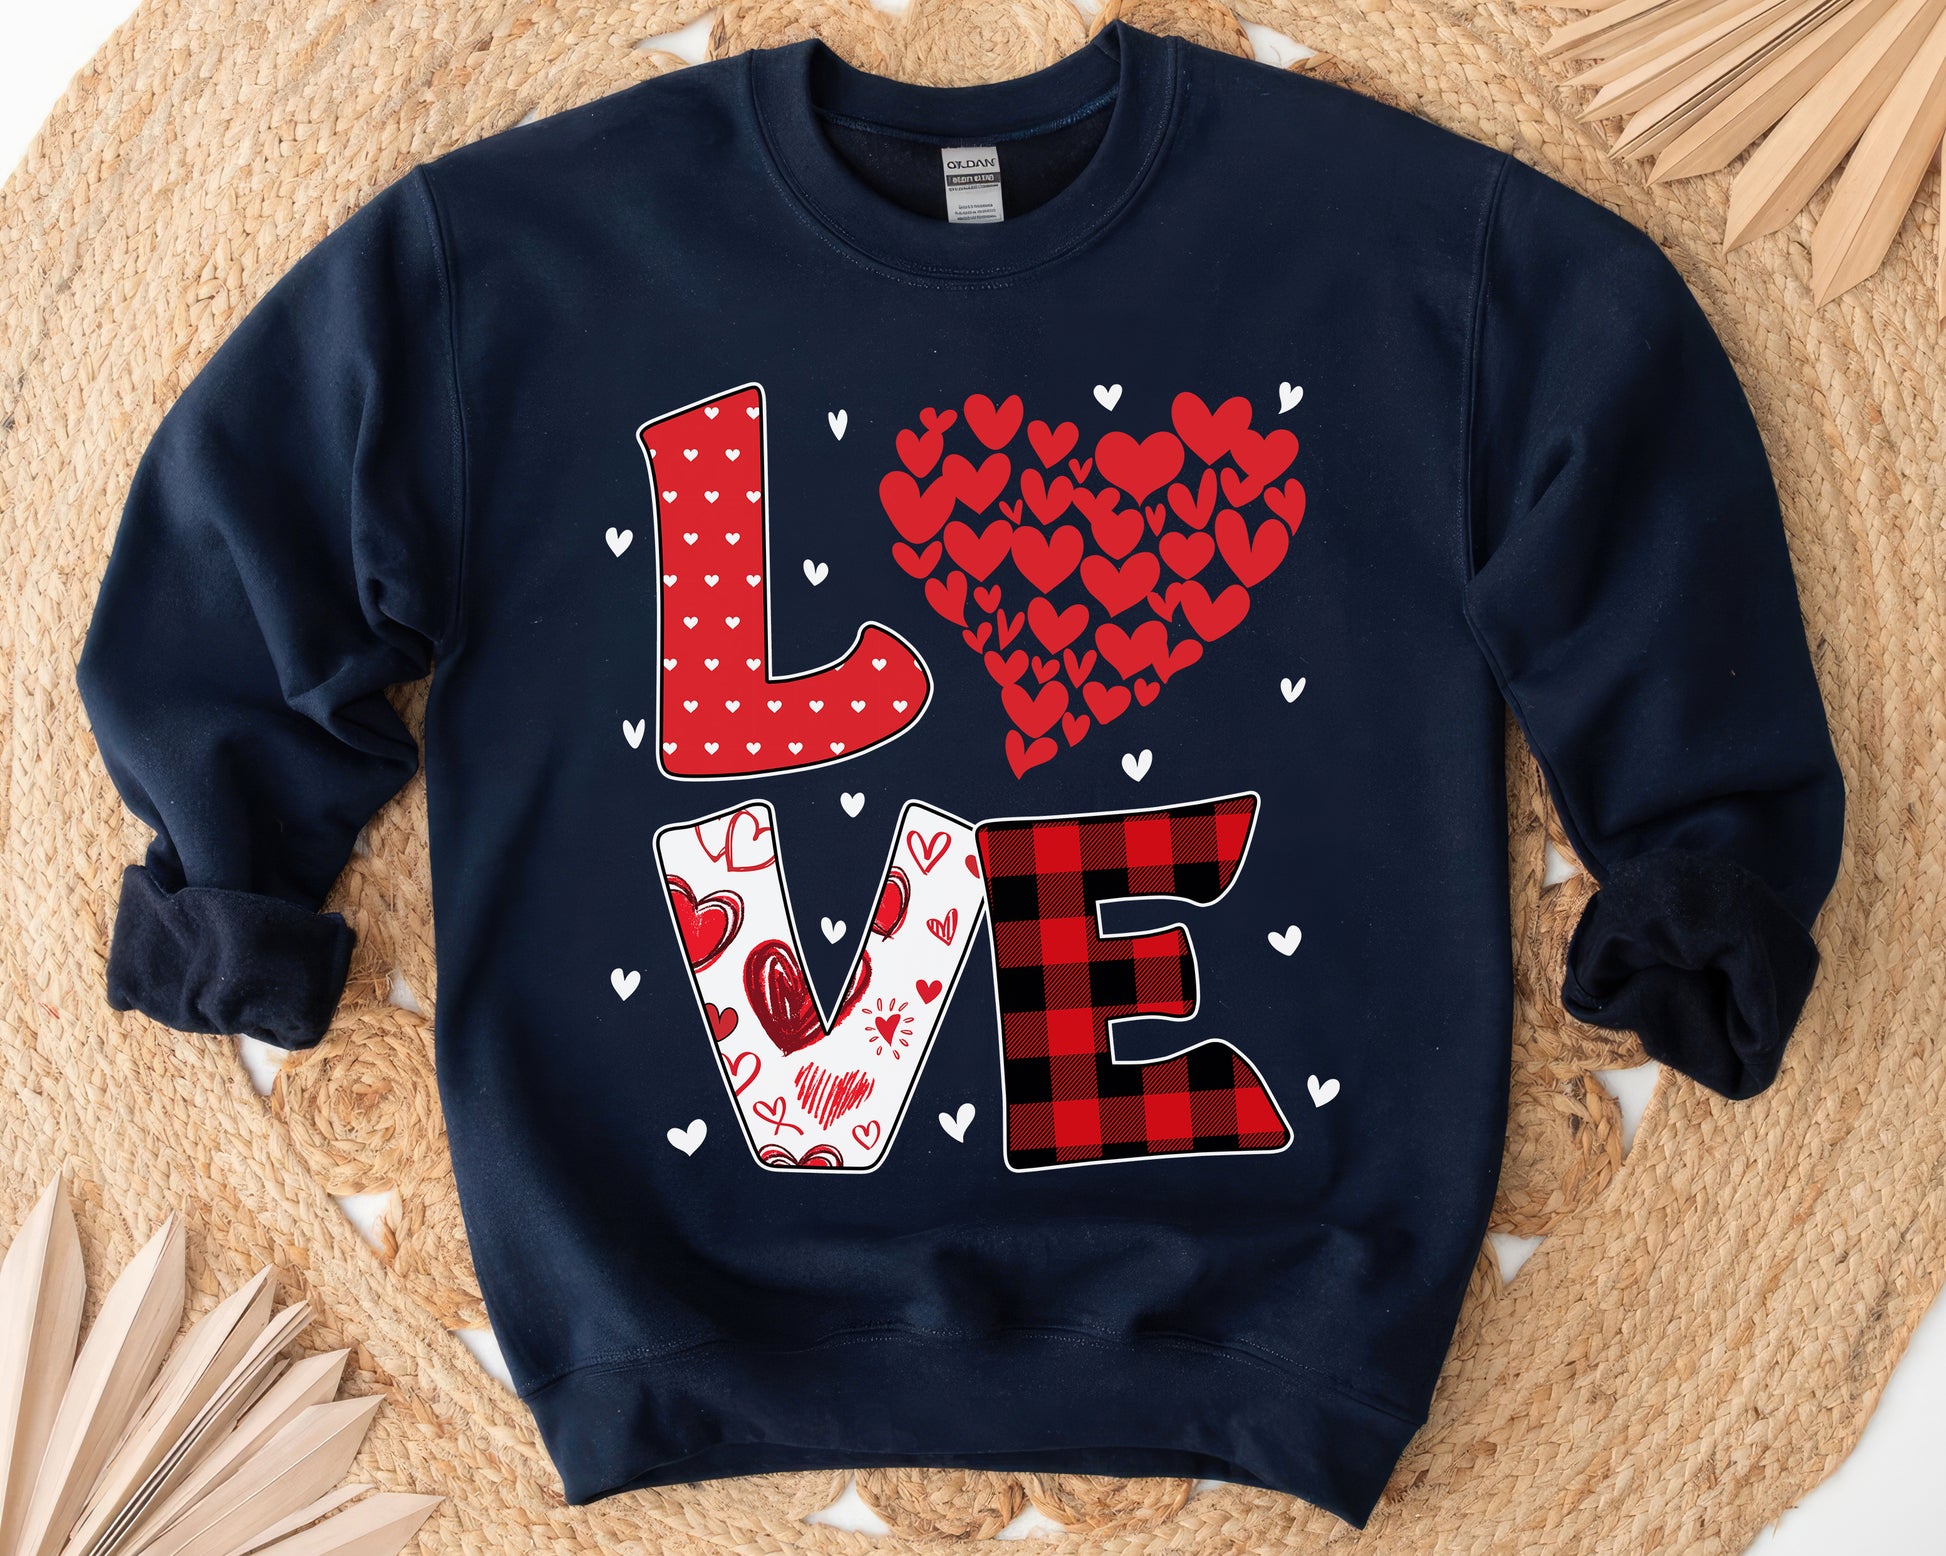 Tee Art Online - Valentine Red Hearts Within Heart LOVE Teacher Personalized Sweatshirt | Valentine's Day Kawaii Cute Gifts | Buffalo Plaid Pattern Design - No Text